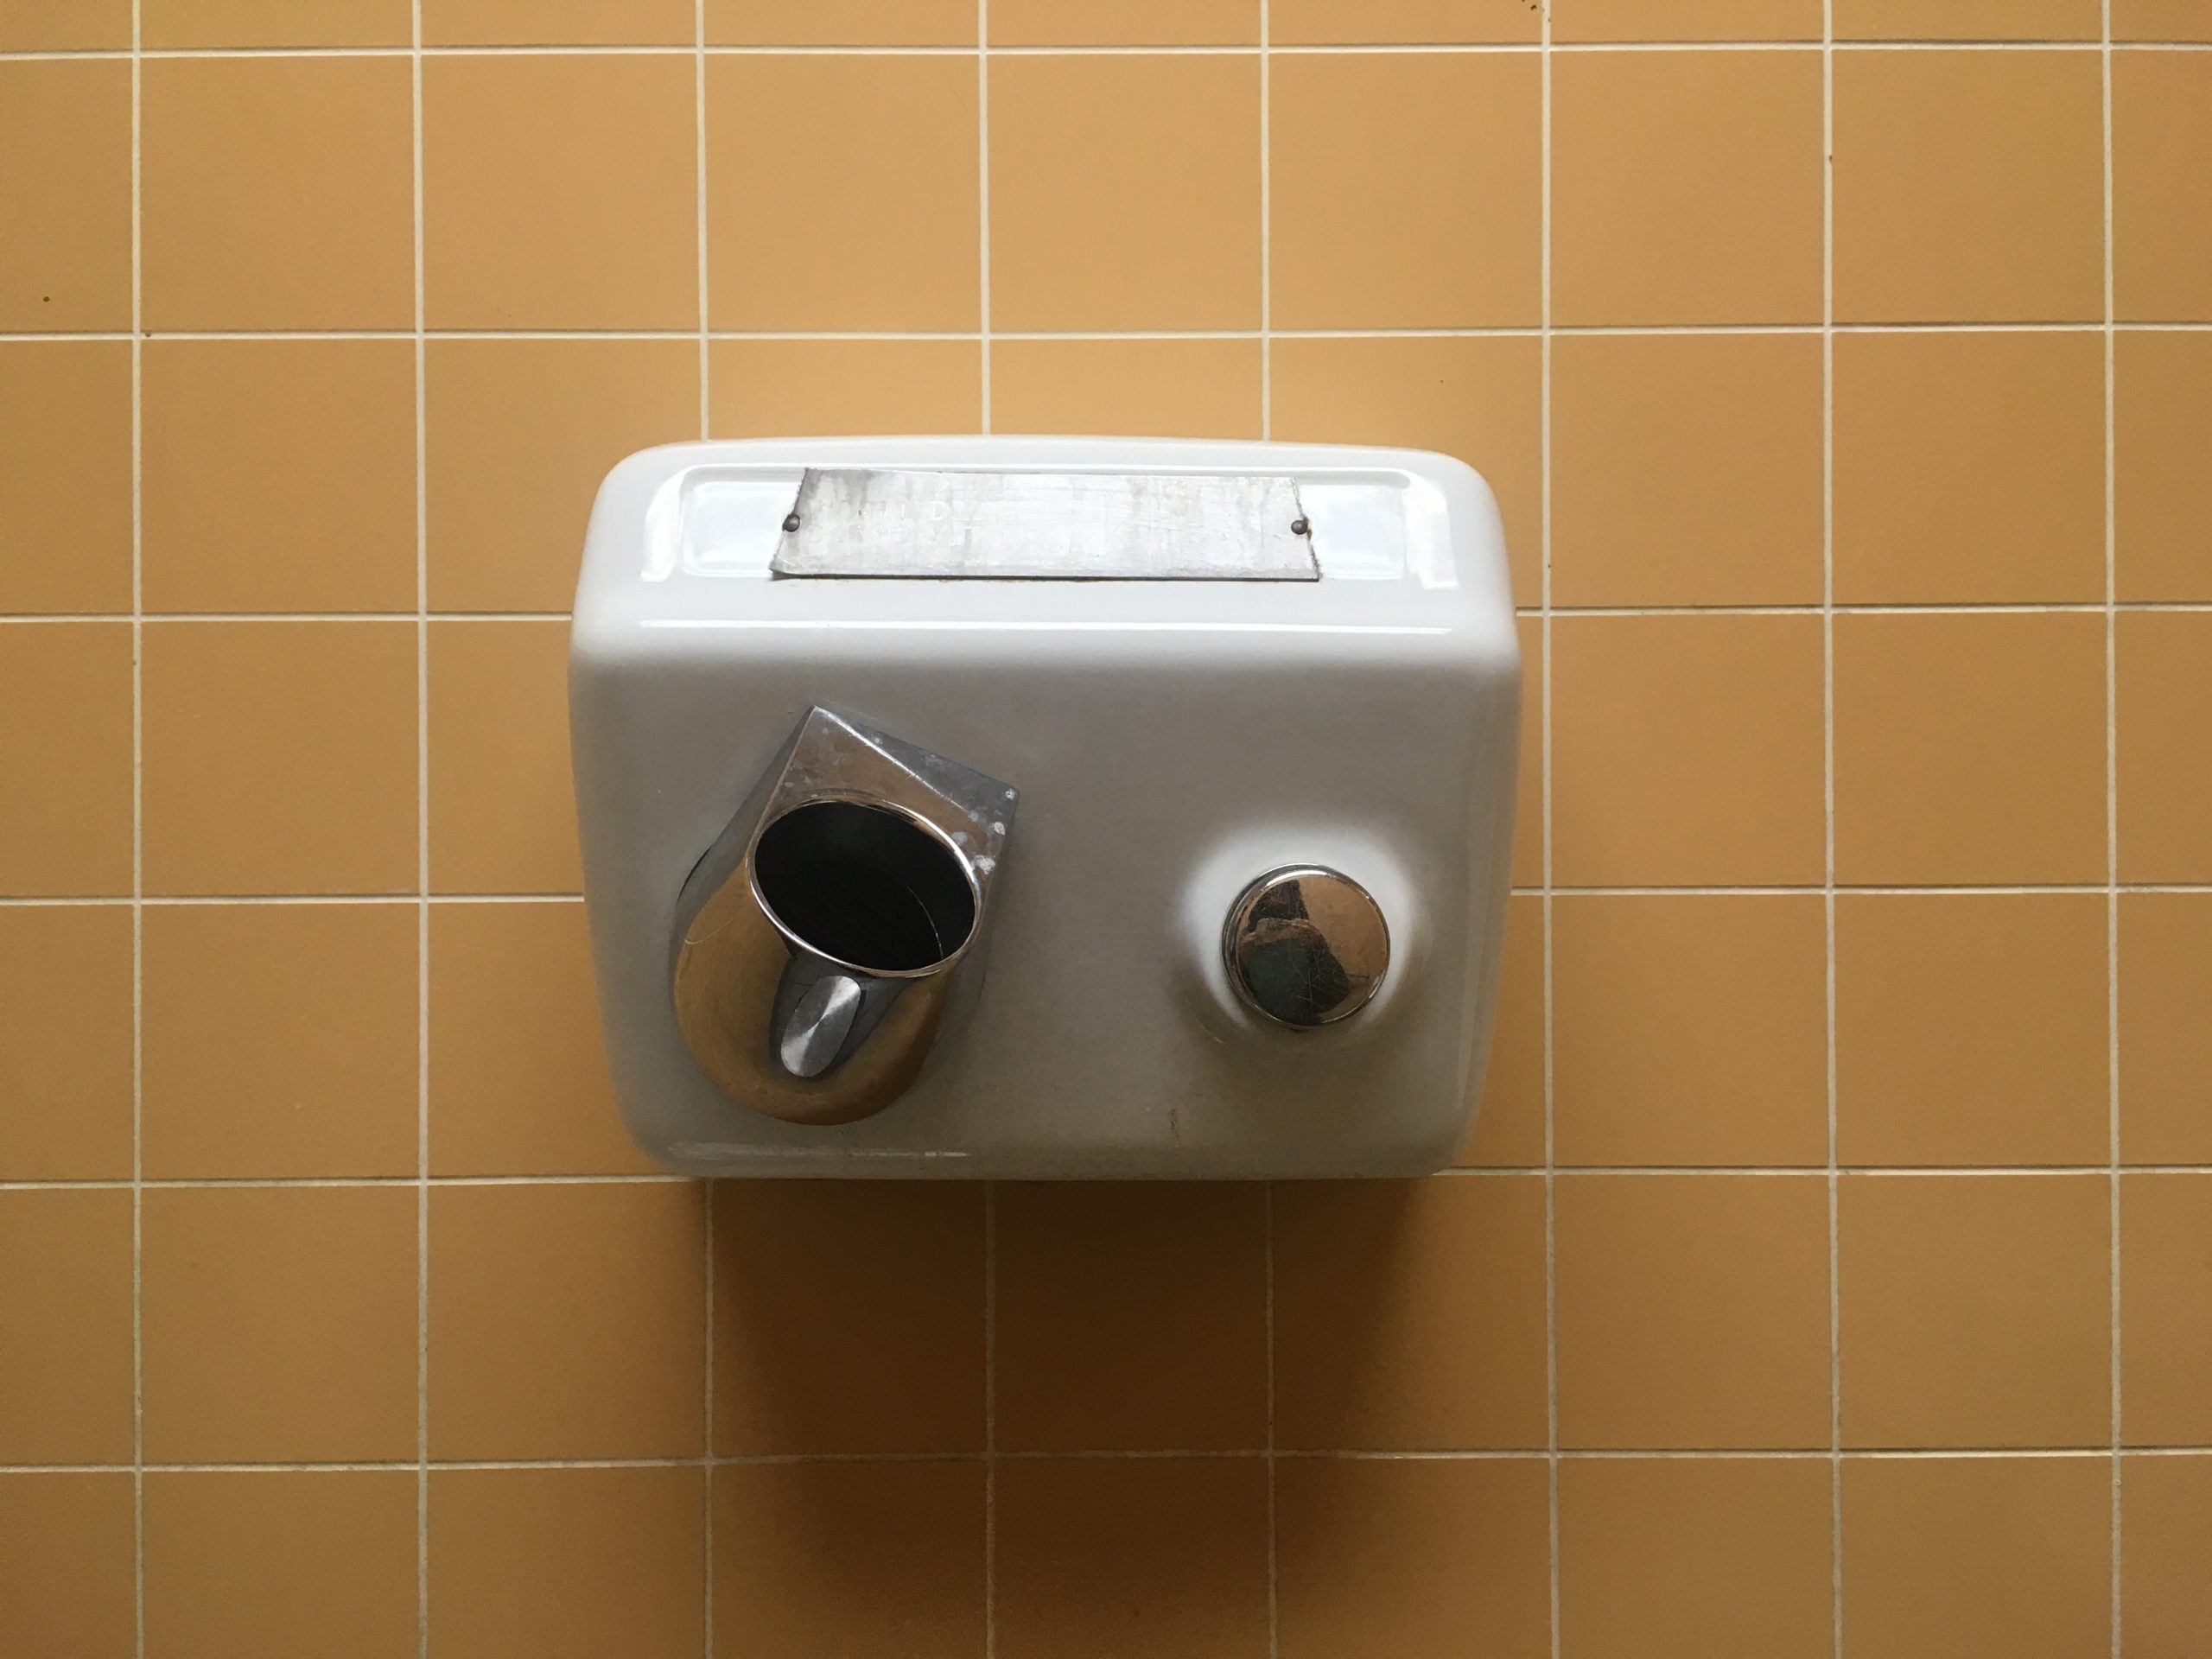 Eco-Friendly Solutions for Your Home: Why Hand Dryers Are a Great Option